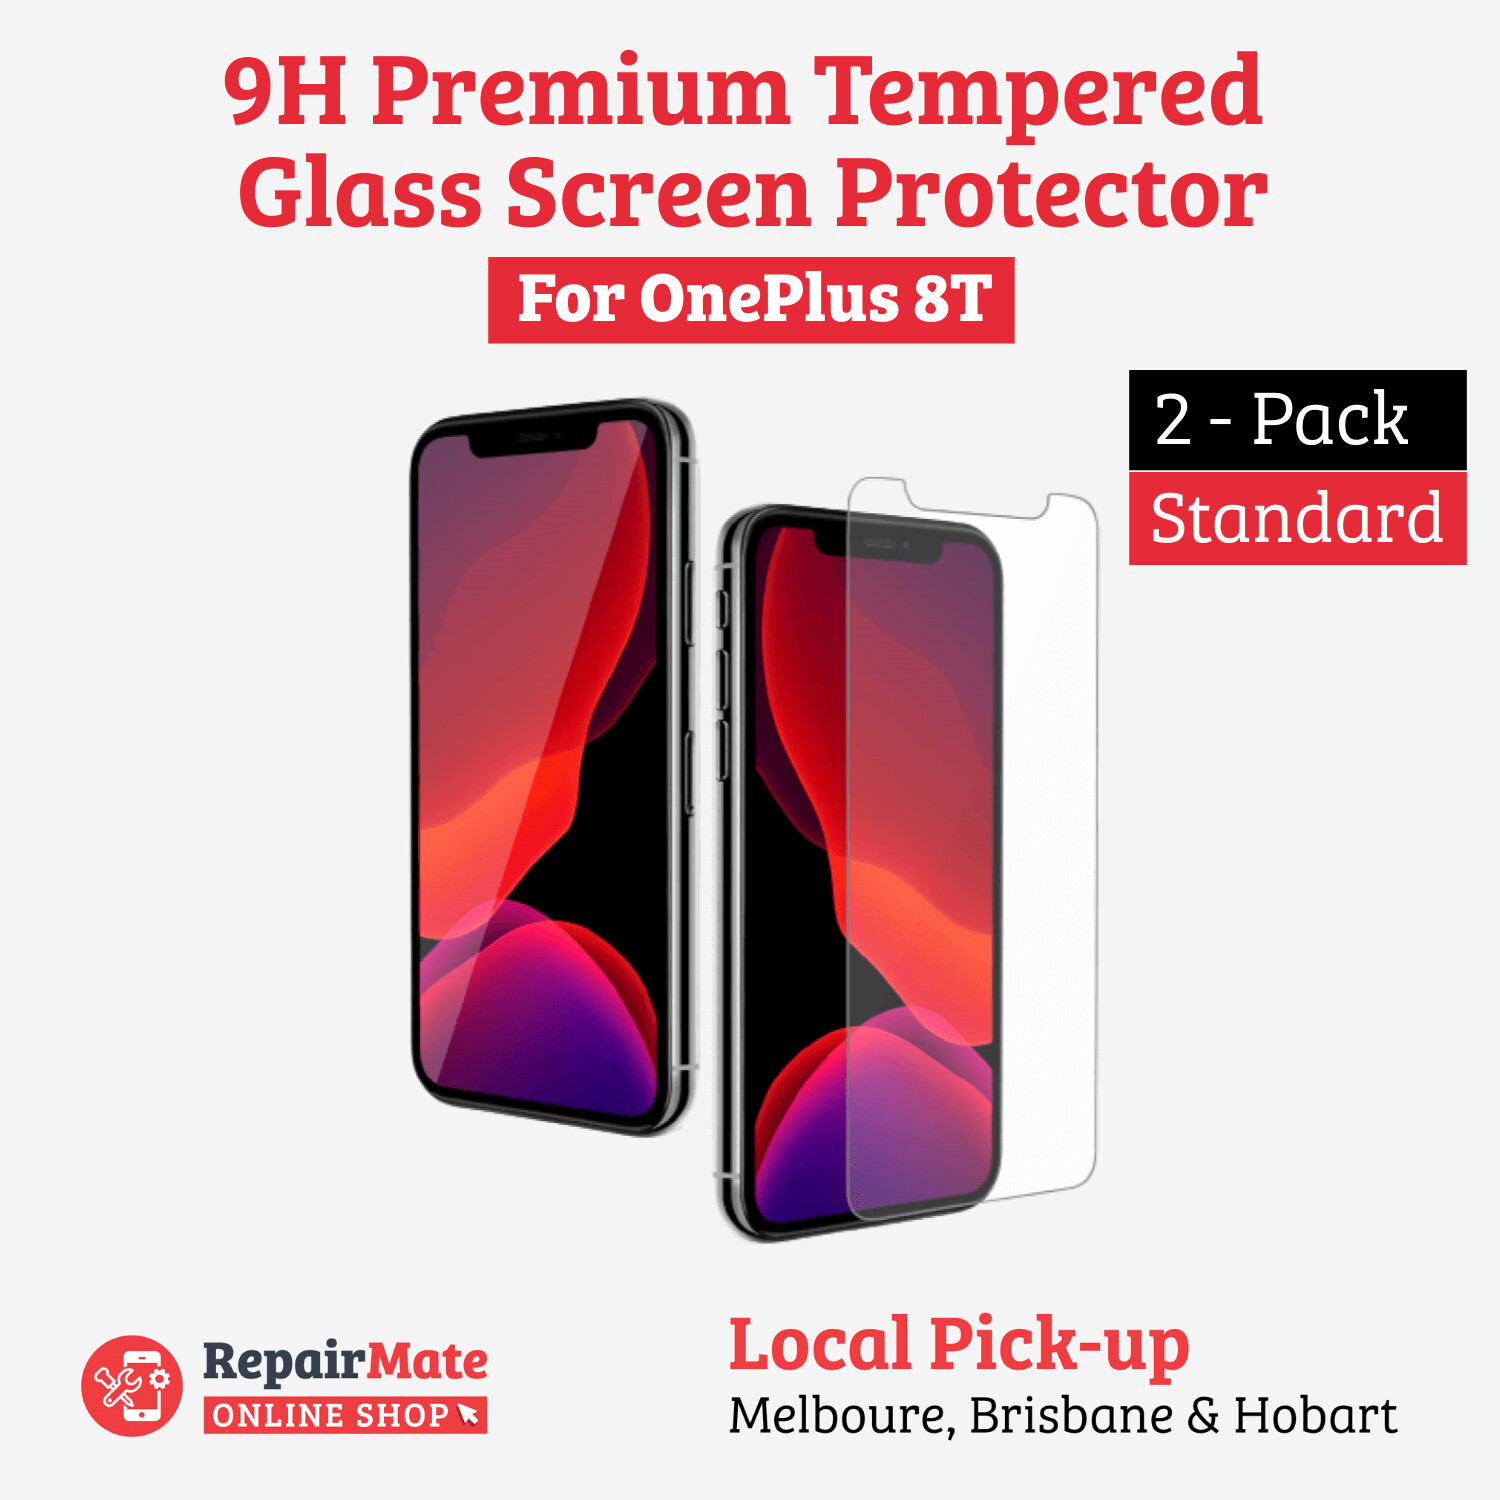 OnePlus 8T 9H Premium Tempered Glass Screen Protector [2 Pack]